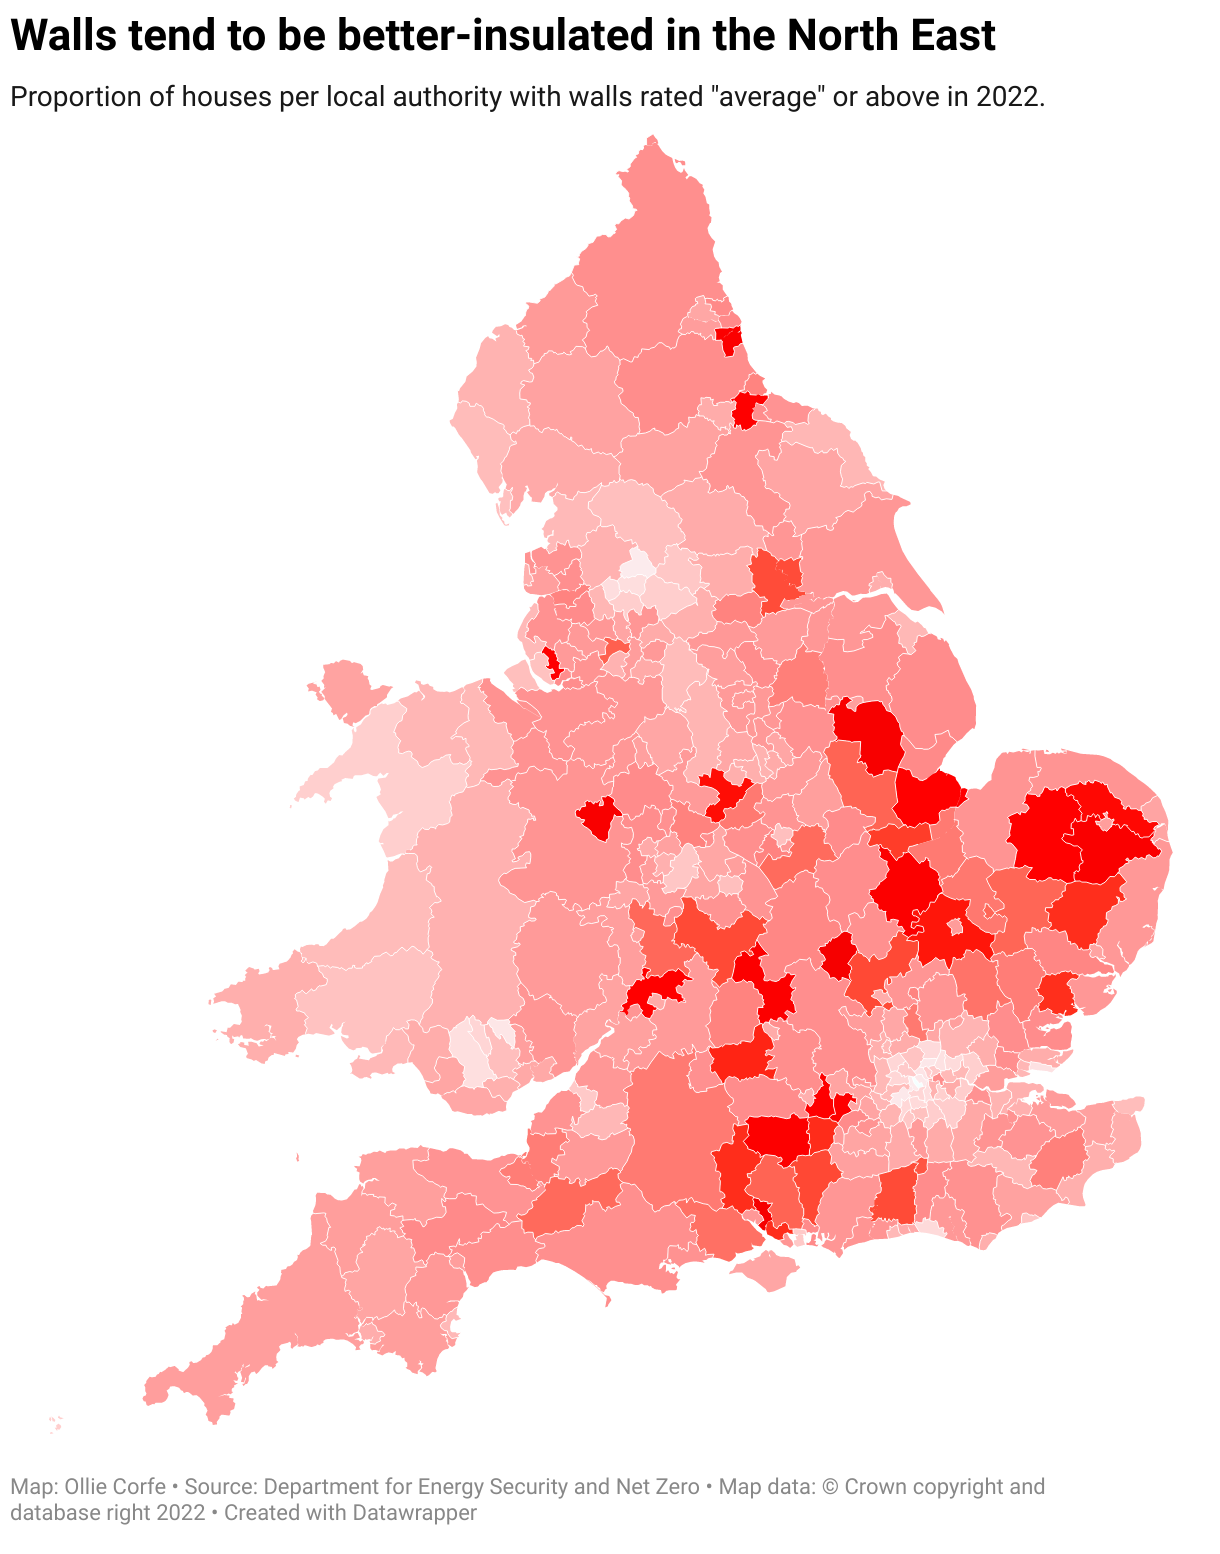 Map of the UK by wall insulation rating.